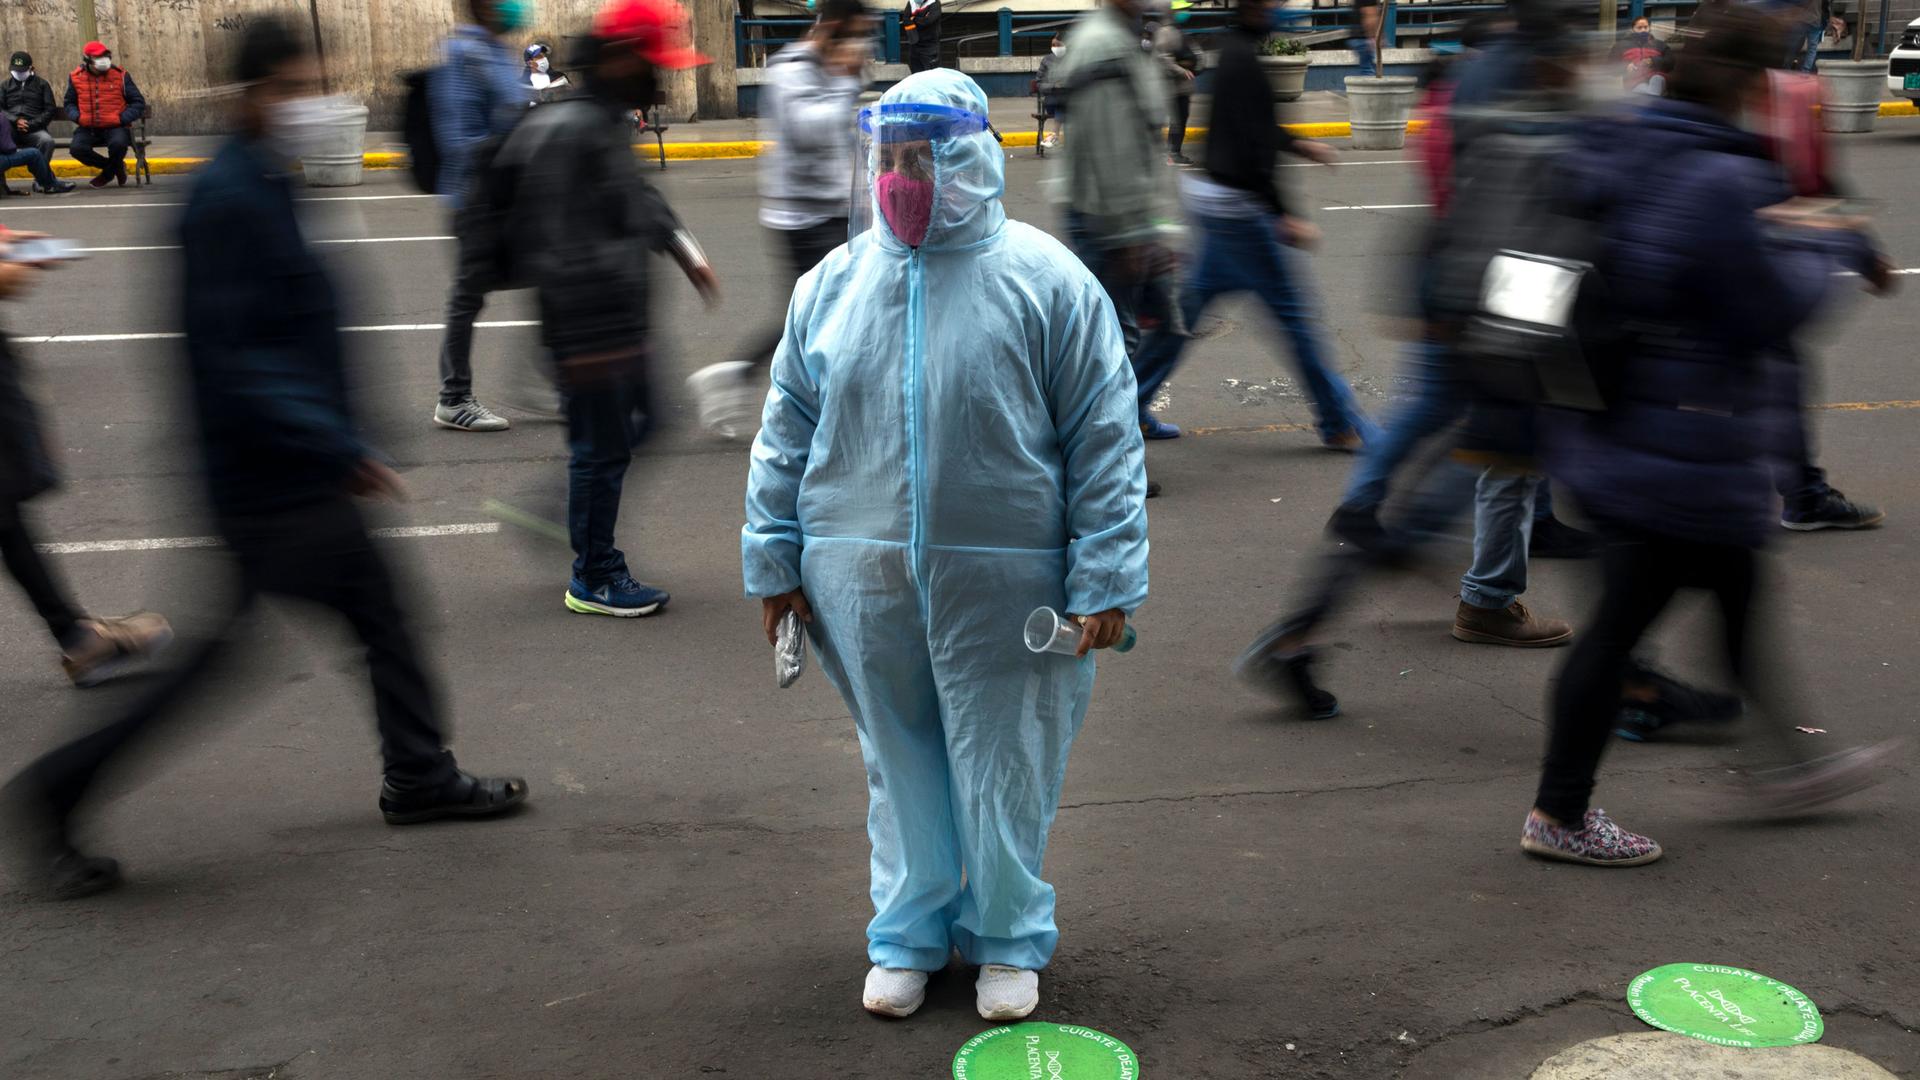 A woman is shown standing and wearing a full blue medical protective outfit with several people walking past her in blurred motion.